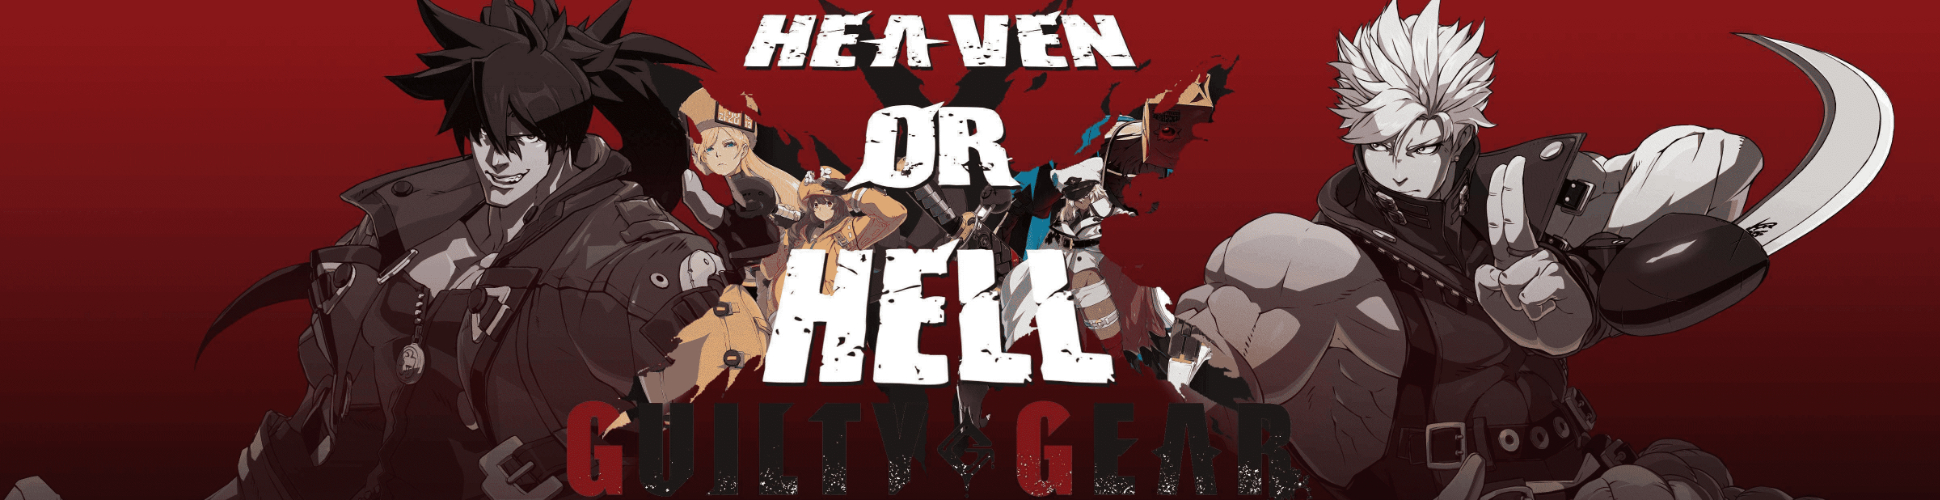 Heaven or Hell #51